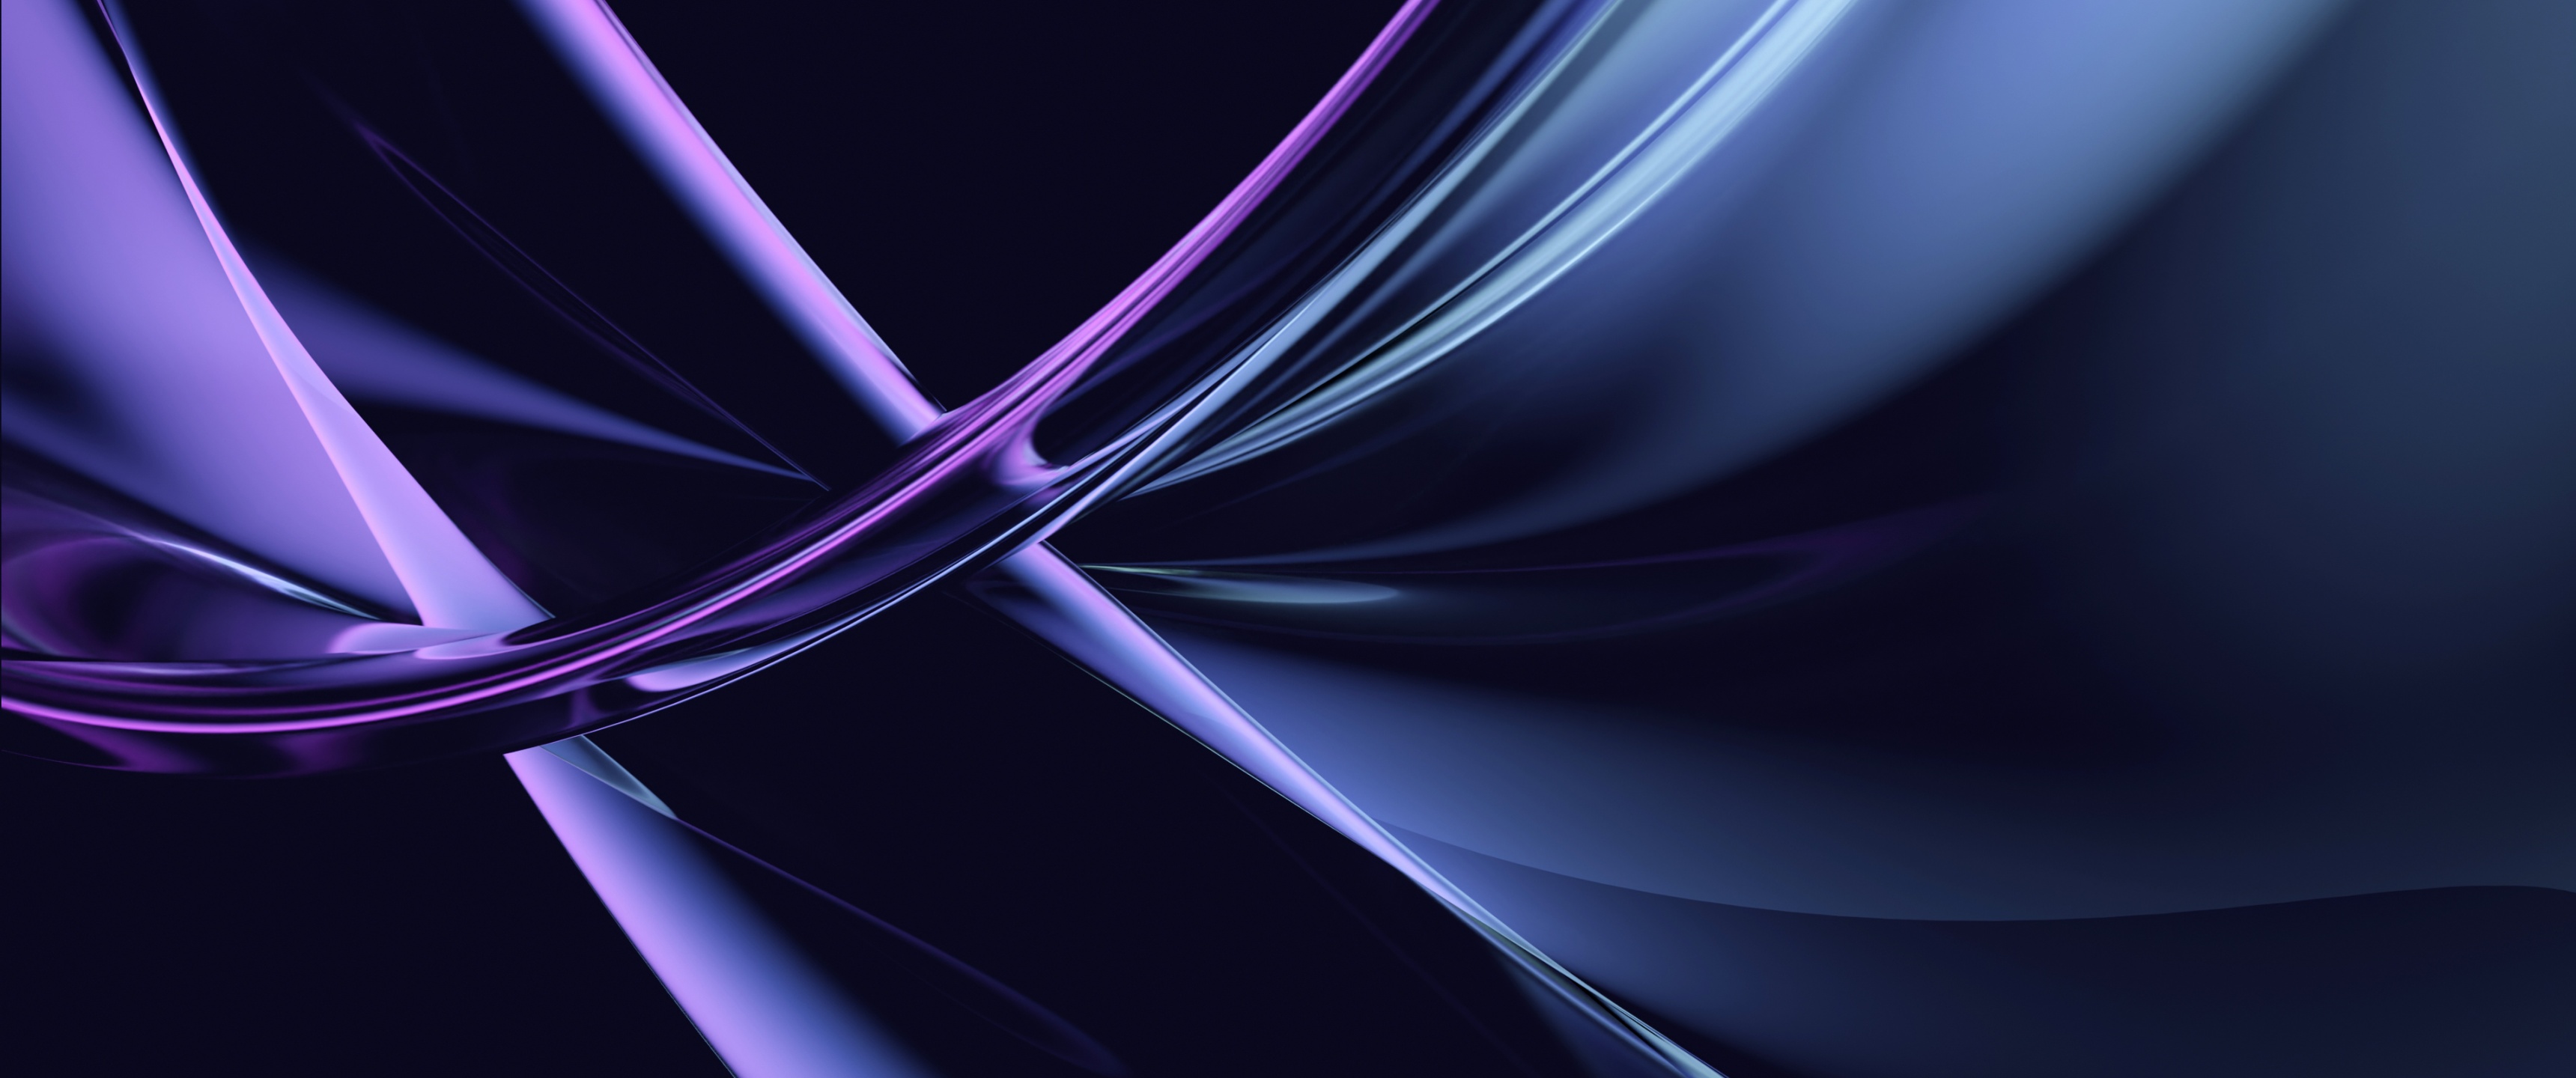 Glossy Wallpaper 4K, Abstract background, Abstract, #9602